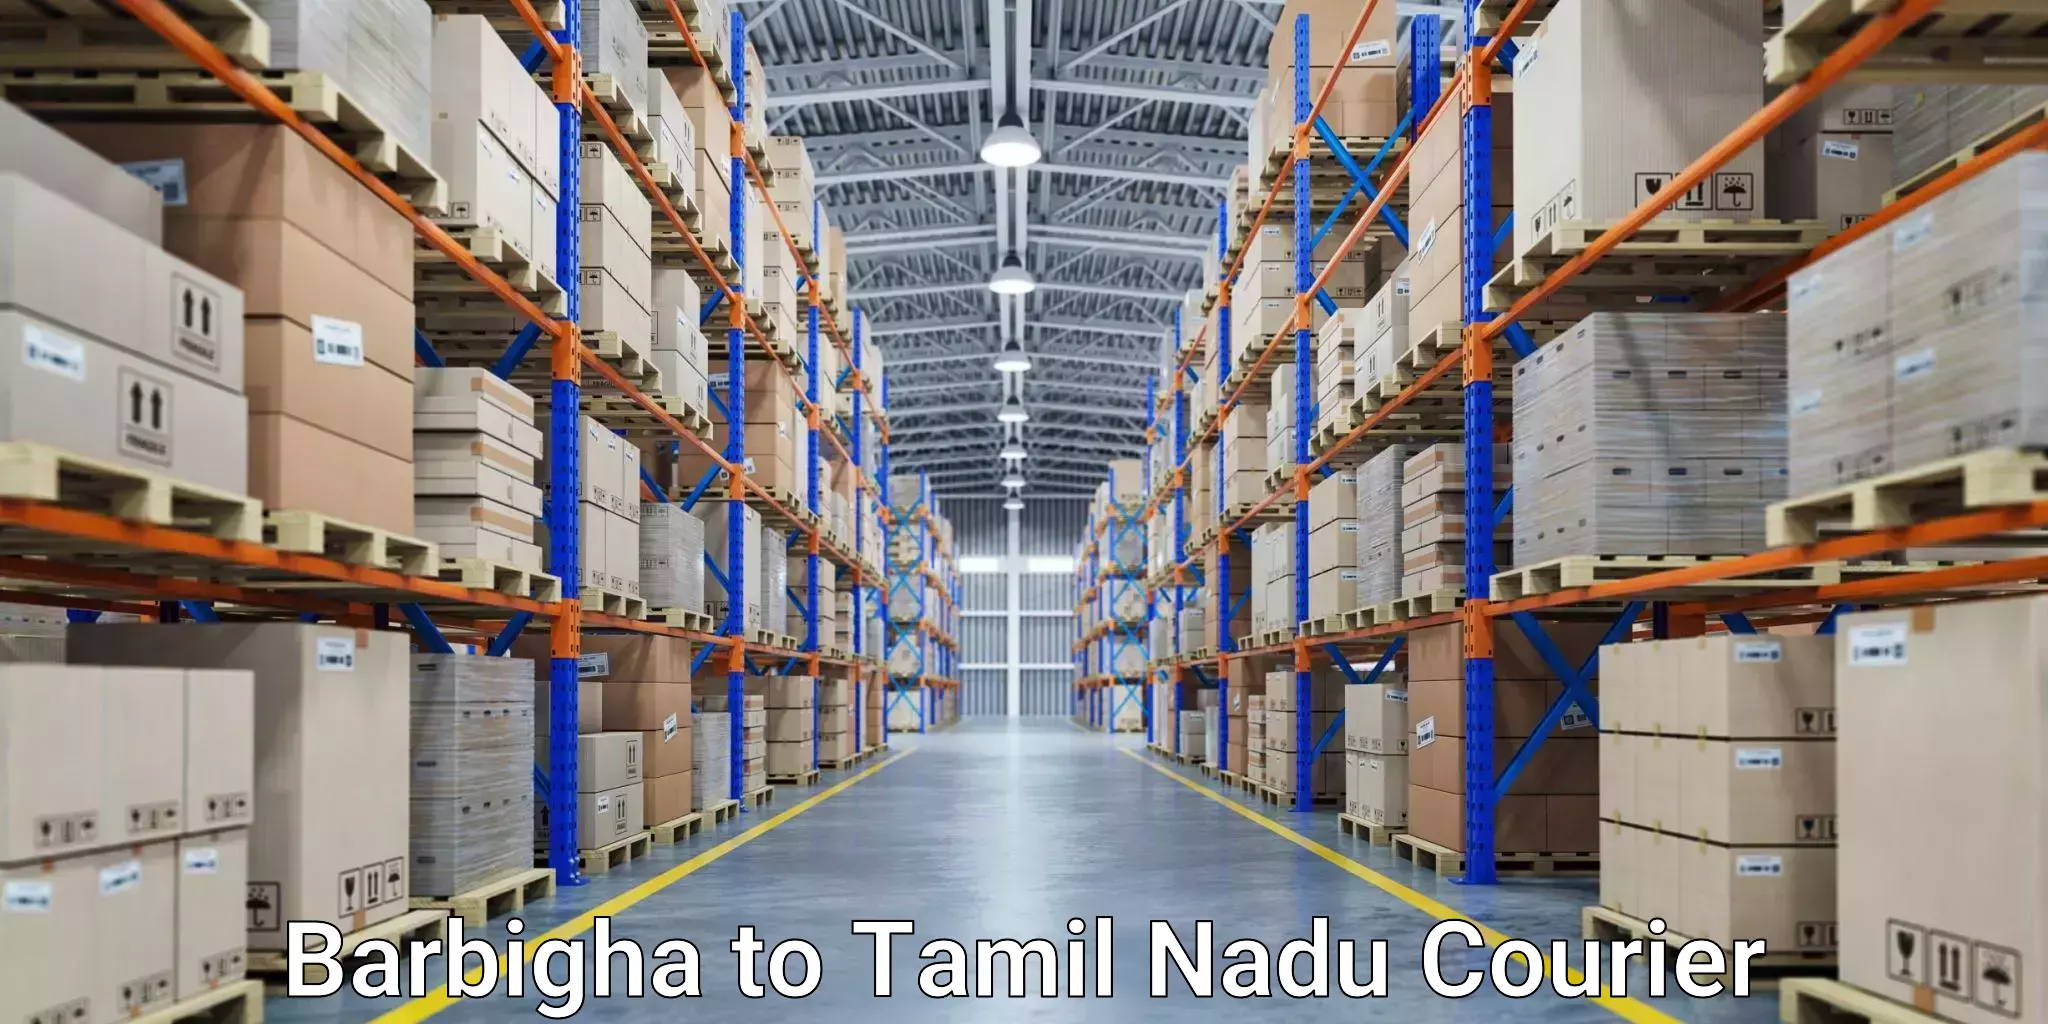 Courier rate comparison Barbigha to Ennore Port Chennai